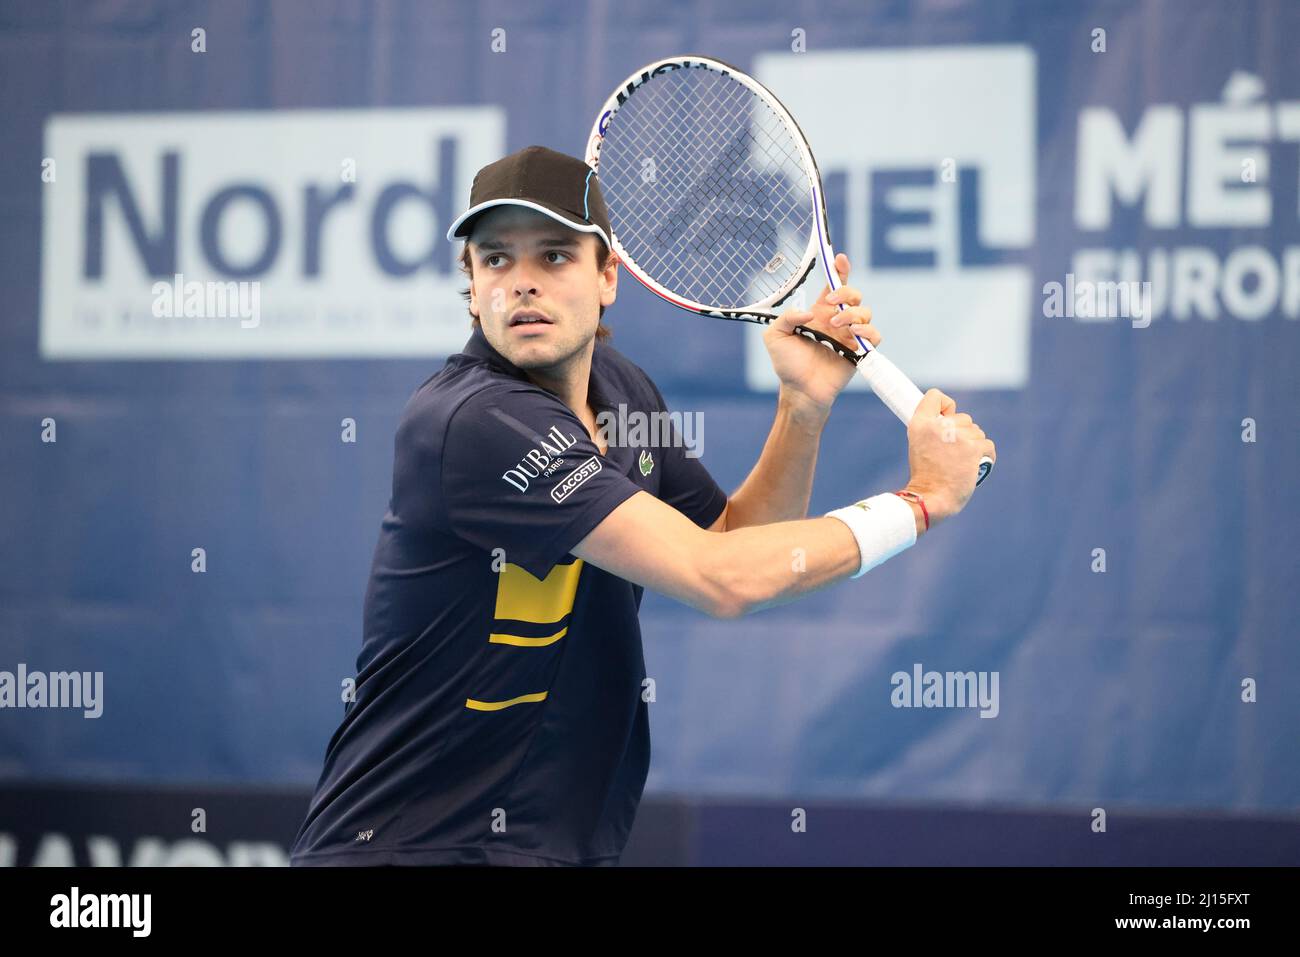 Lille, France. 22nd Mar, 2022. Gregoire Barrere during the Play In  Challenger 2022, ATP Challenger Tour tennis tournament on March 22, 2022 at  Tennis Club Lillois Lille Metropole in Lille, France -